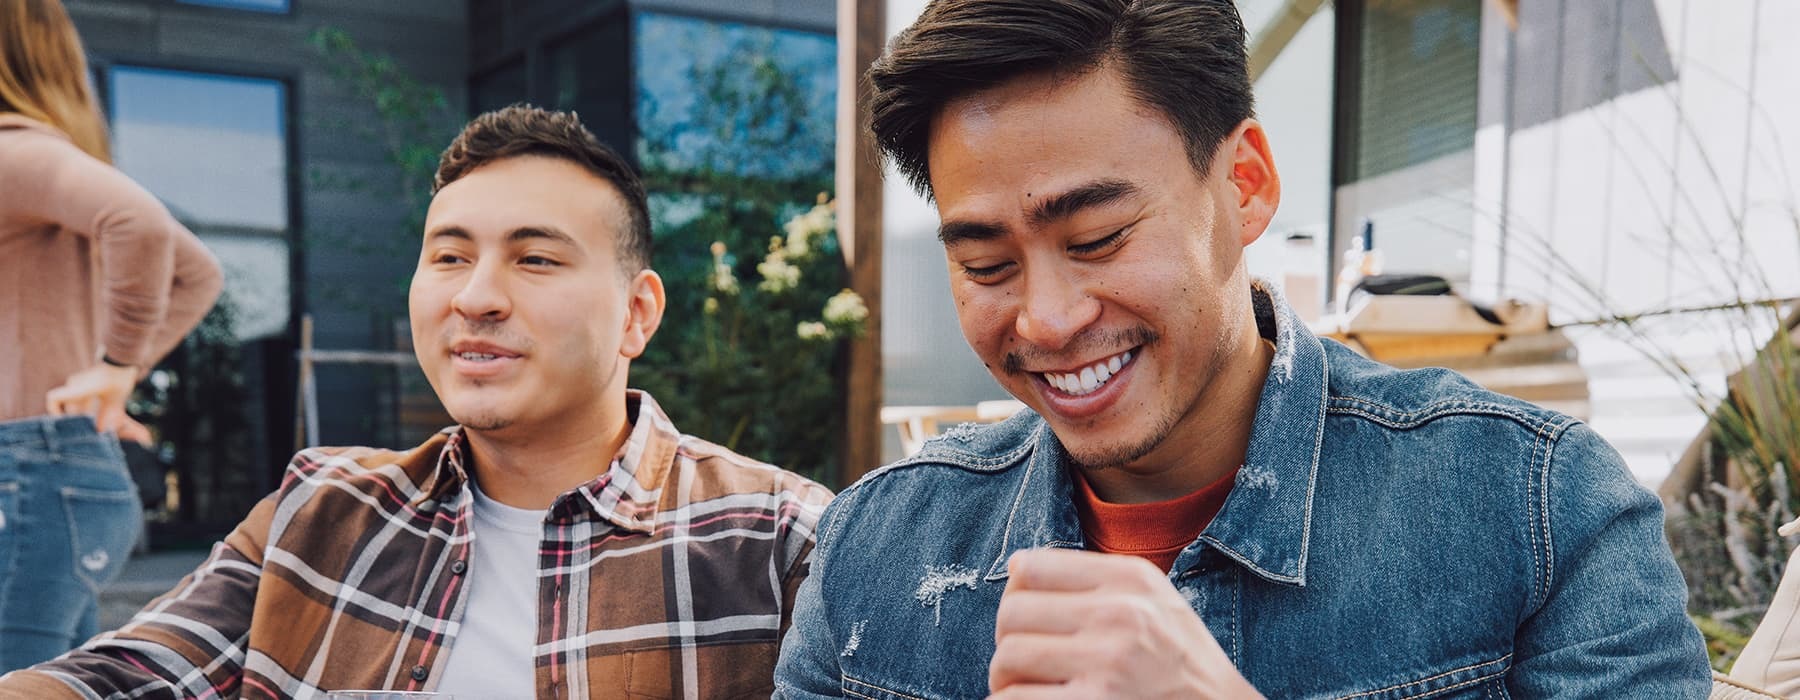 lifestyle image of two men smiling outdoors